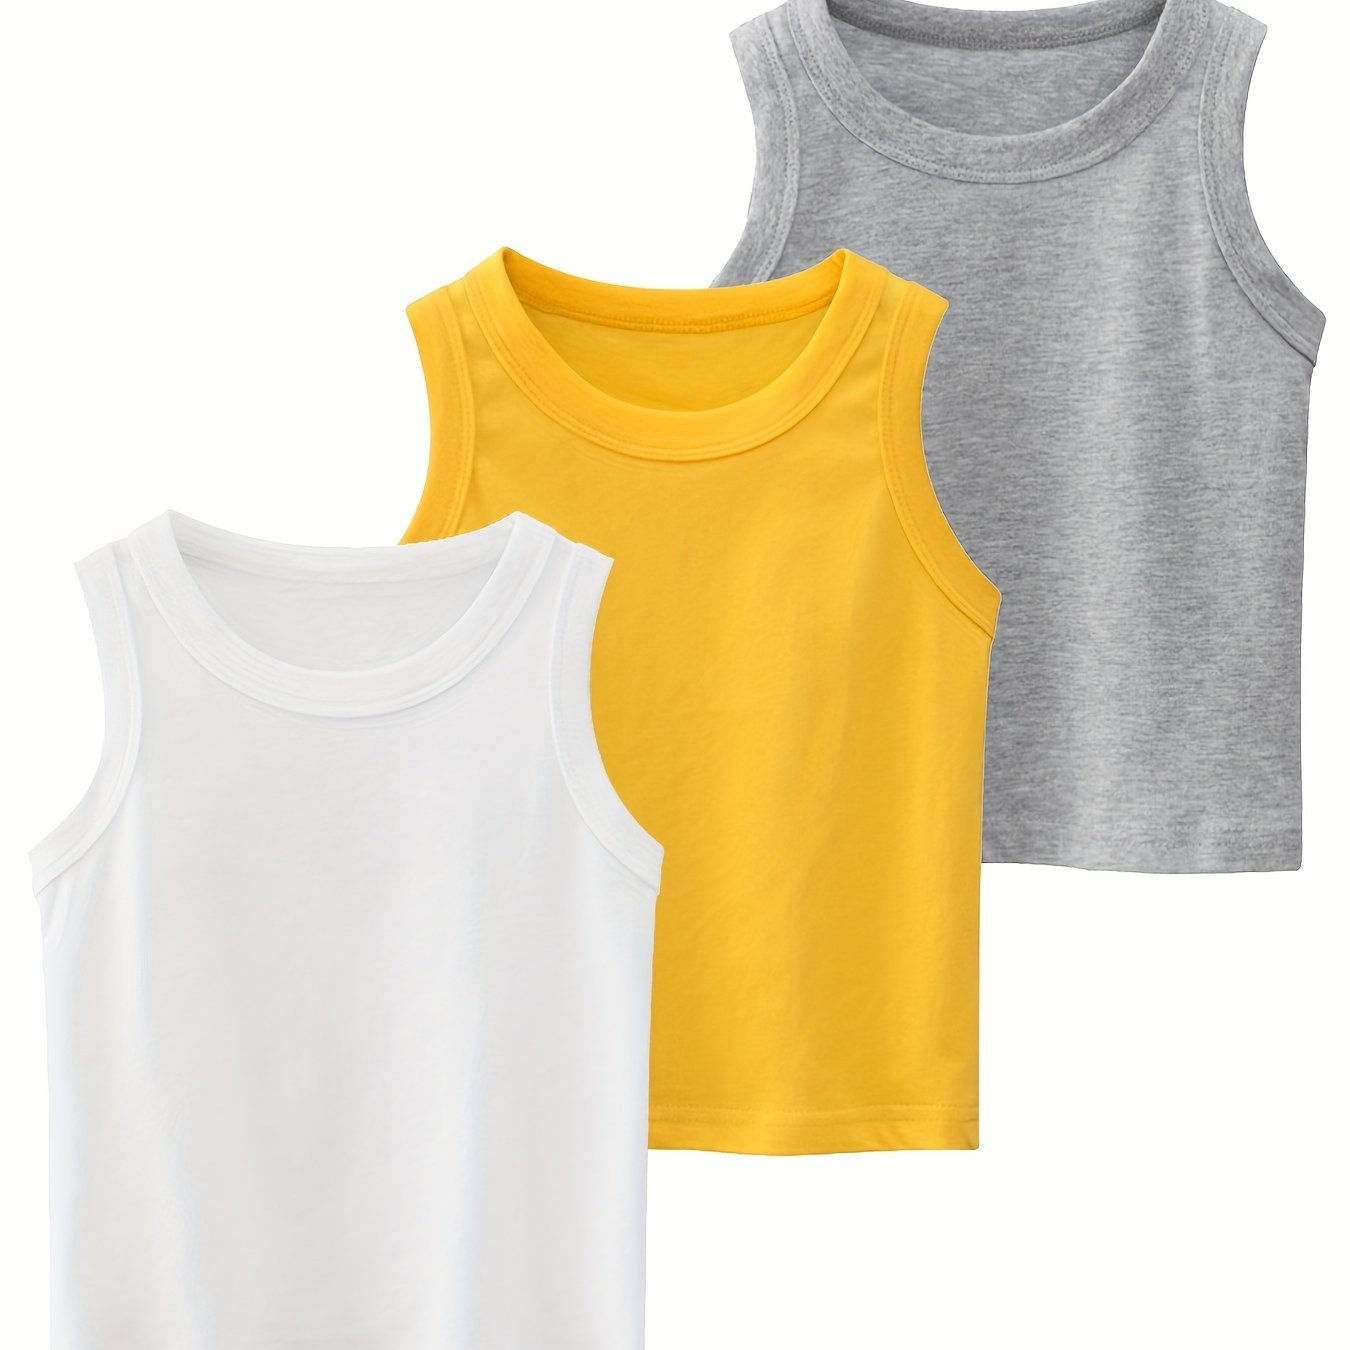 Kids' Tank Tops for Boys & for Girls in Unique Offers